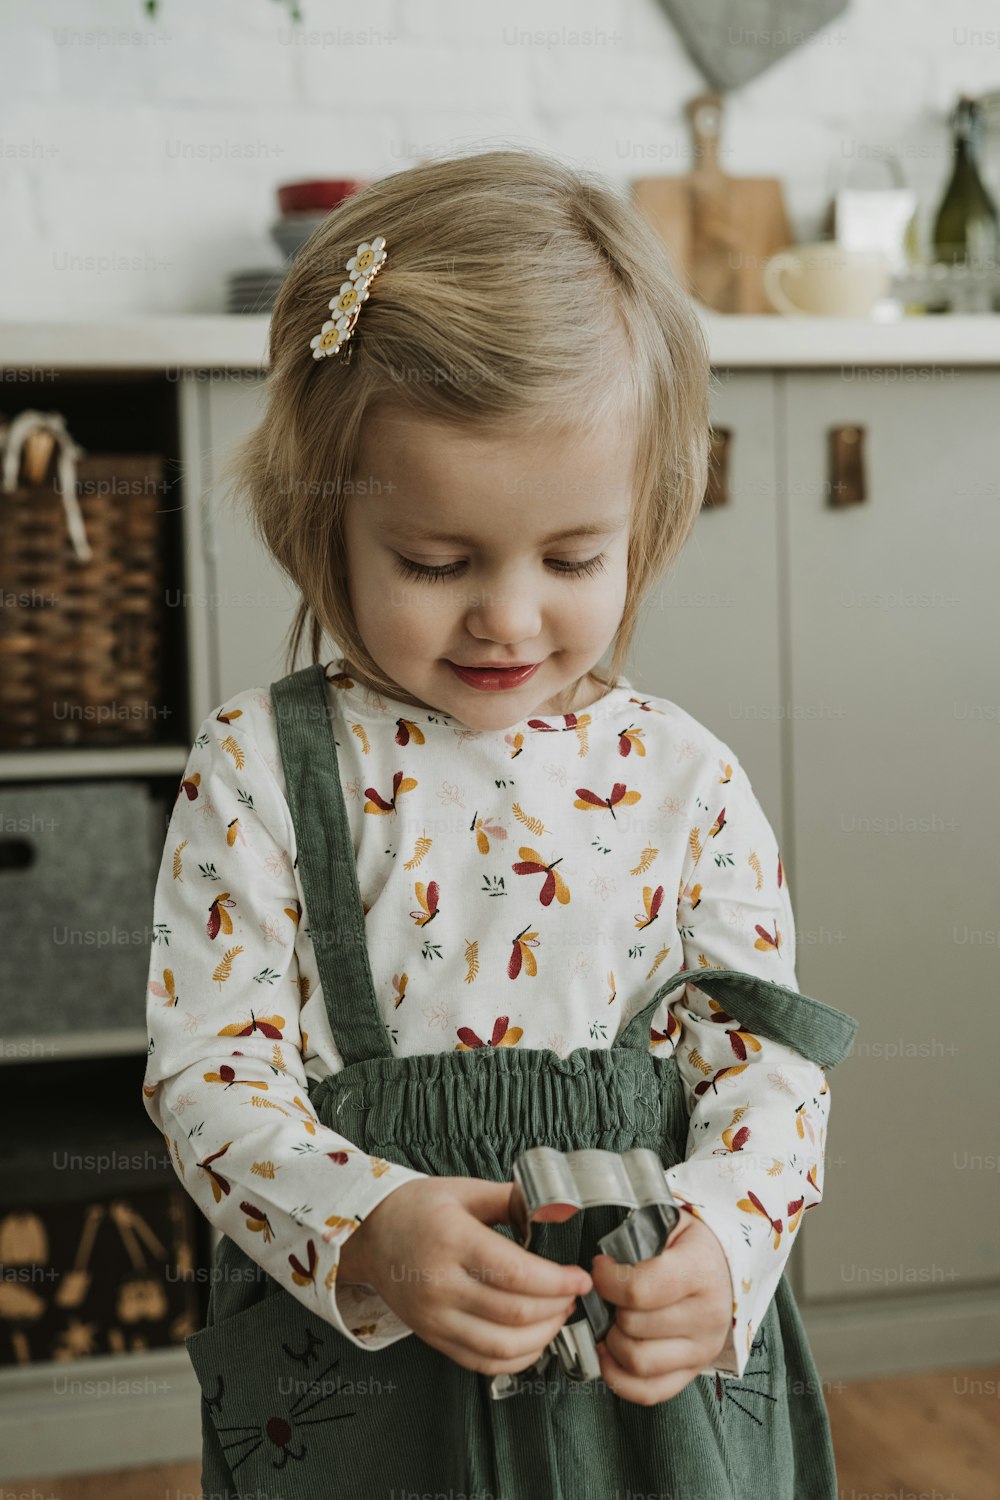 a little girl standing in a kitchen holding a pair of scissors